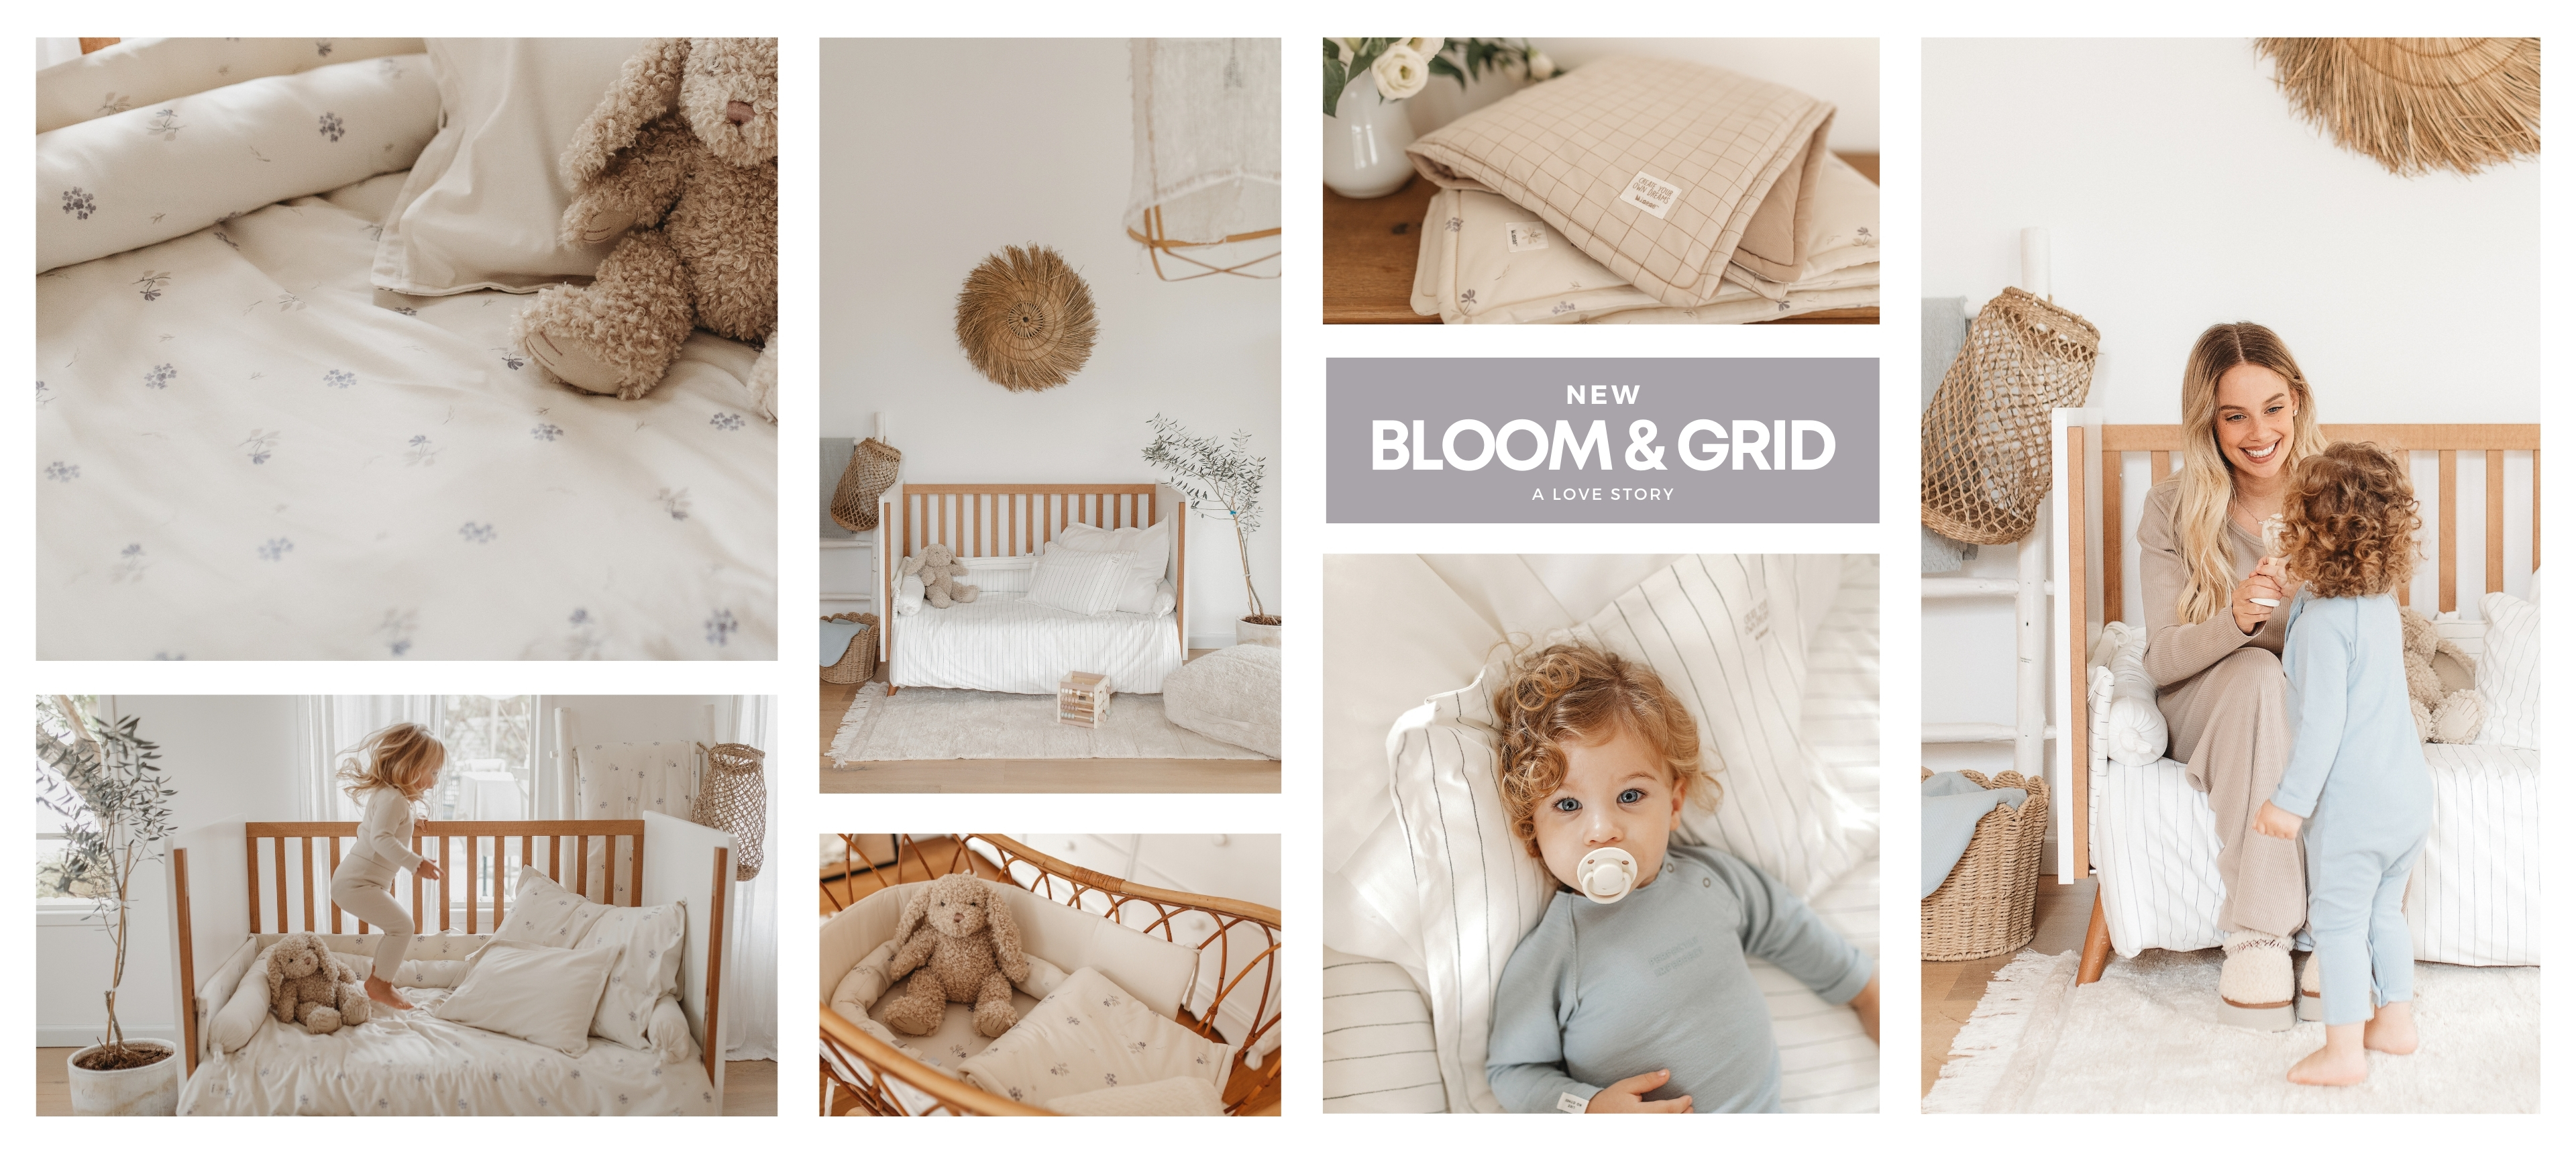 new bloom & grid a love story